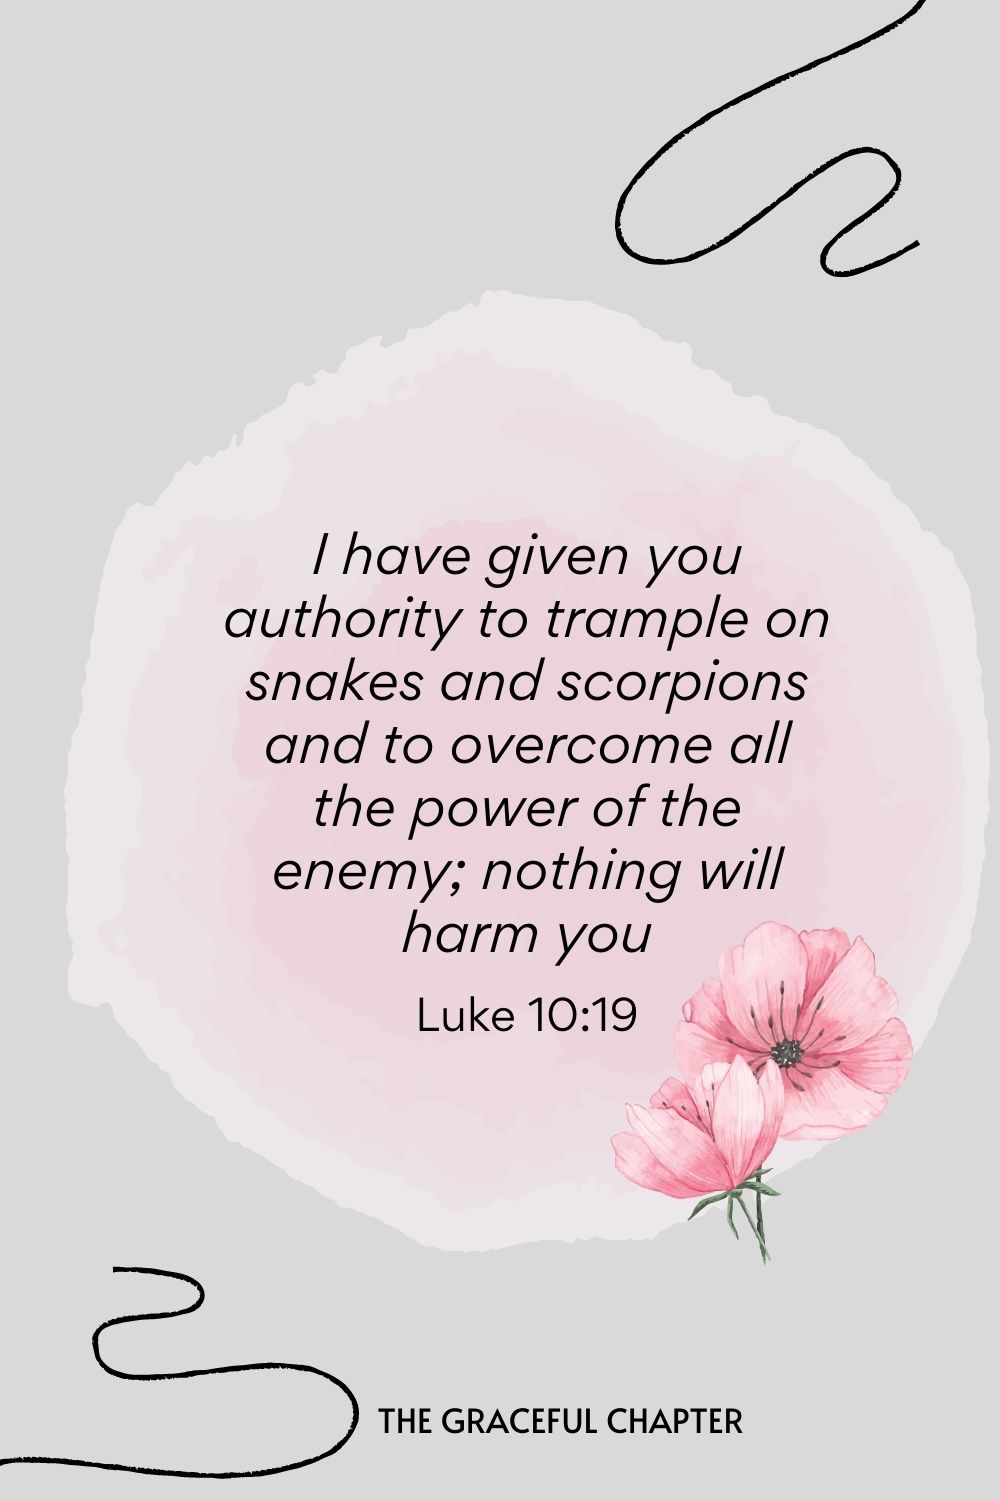 I have given you authority to trample on snakes and scorpions and to overcome all the power of the enemy; nothing will harm you.  Luke 10:19